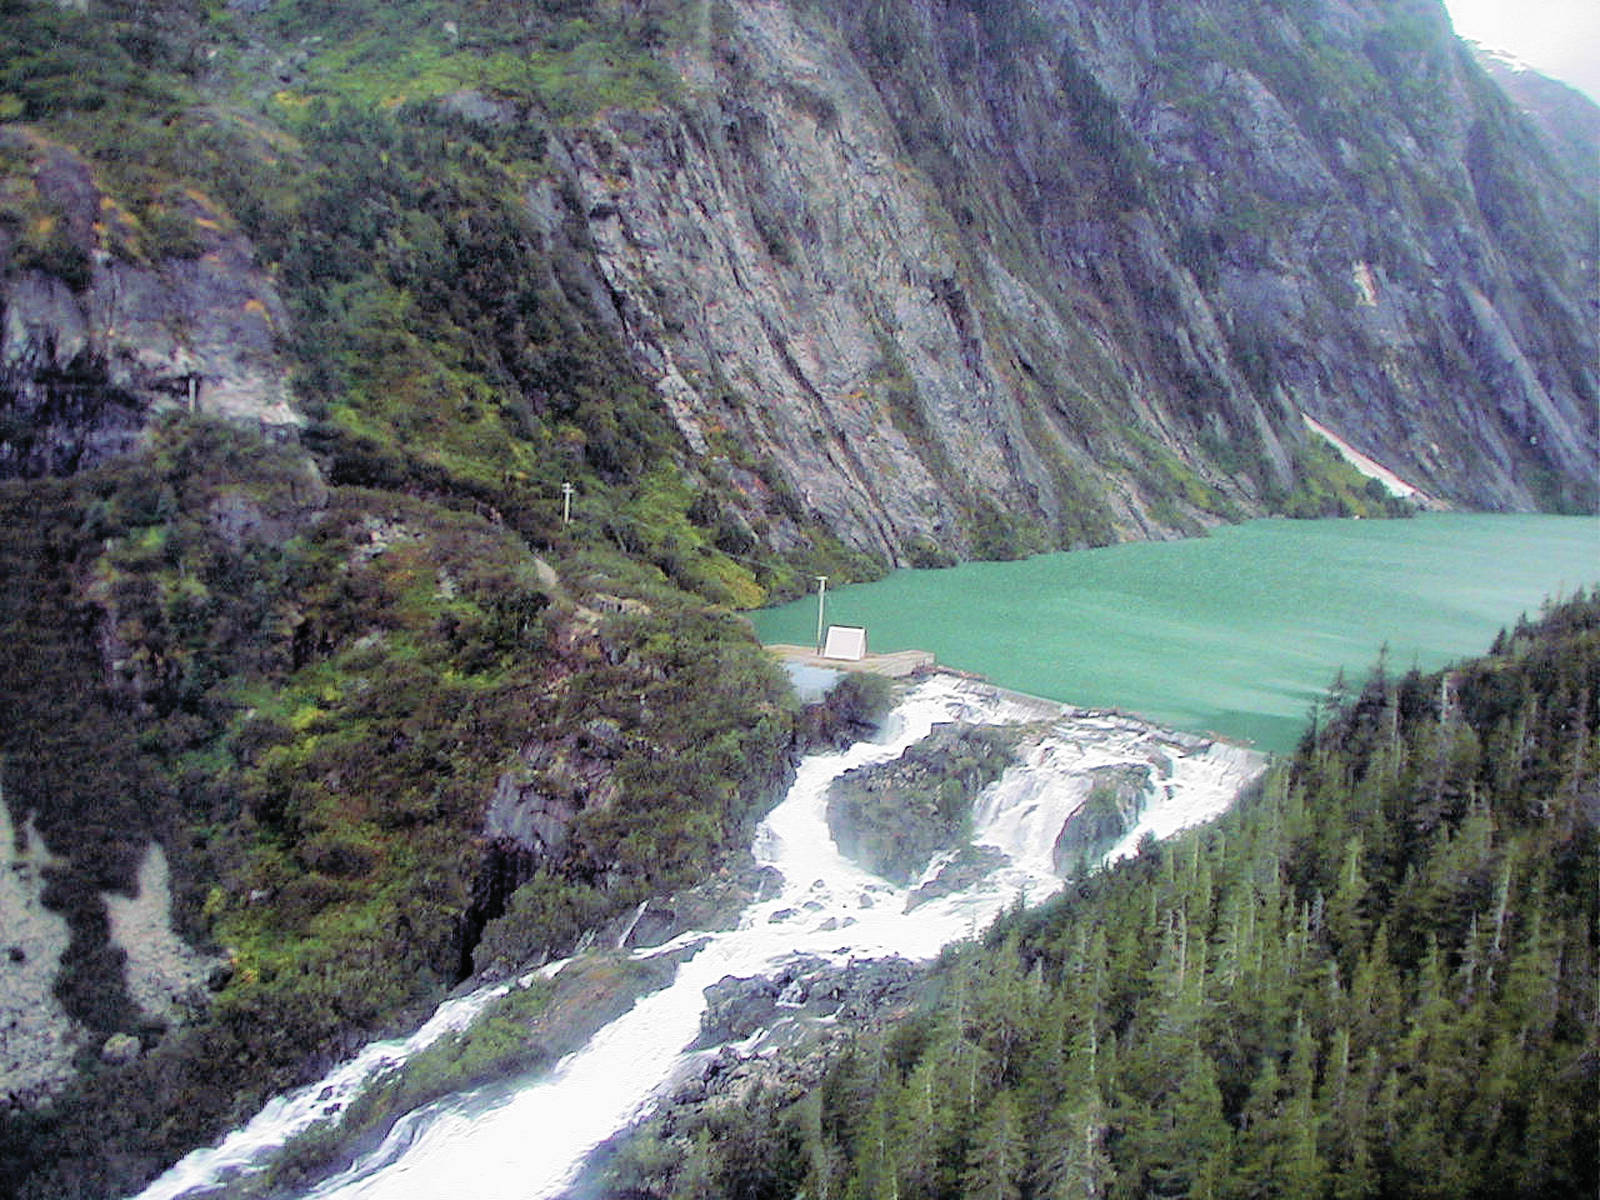 The damming of Long Lake south of Juneau allowed for the construction of the Snettisham Hydroelectric project in the 1960s, which has provided low-cost power to the state capital ever since. A pending sale that could allow the dam to become owned by a Canadian utility is drawing objections from across the state and its lone U.S. Rep. Don Young. (Photo/Courtesy/Alaska Industrial Development and Export Authority)